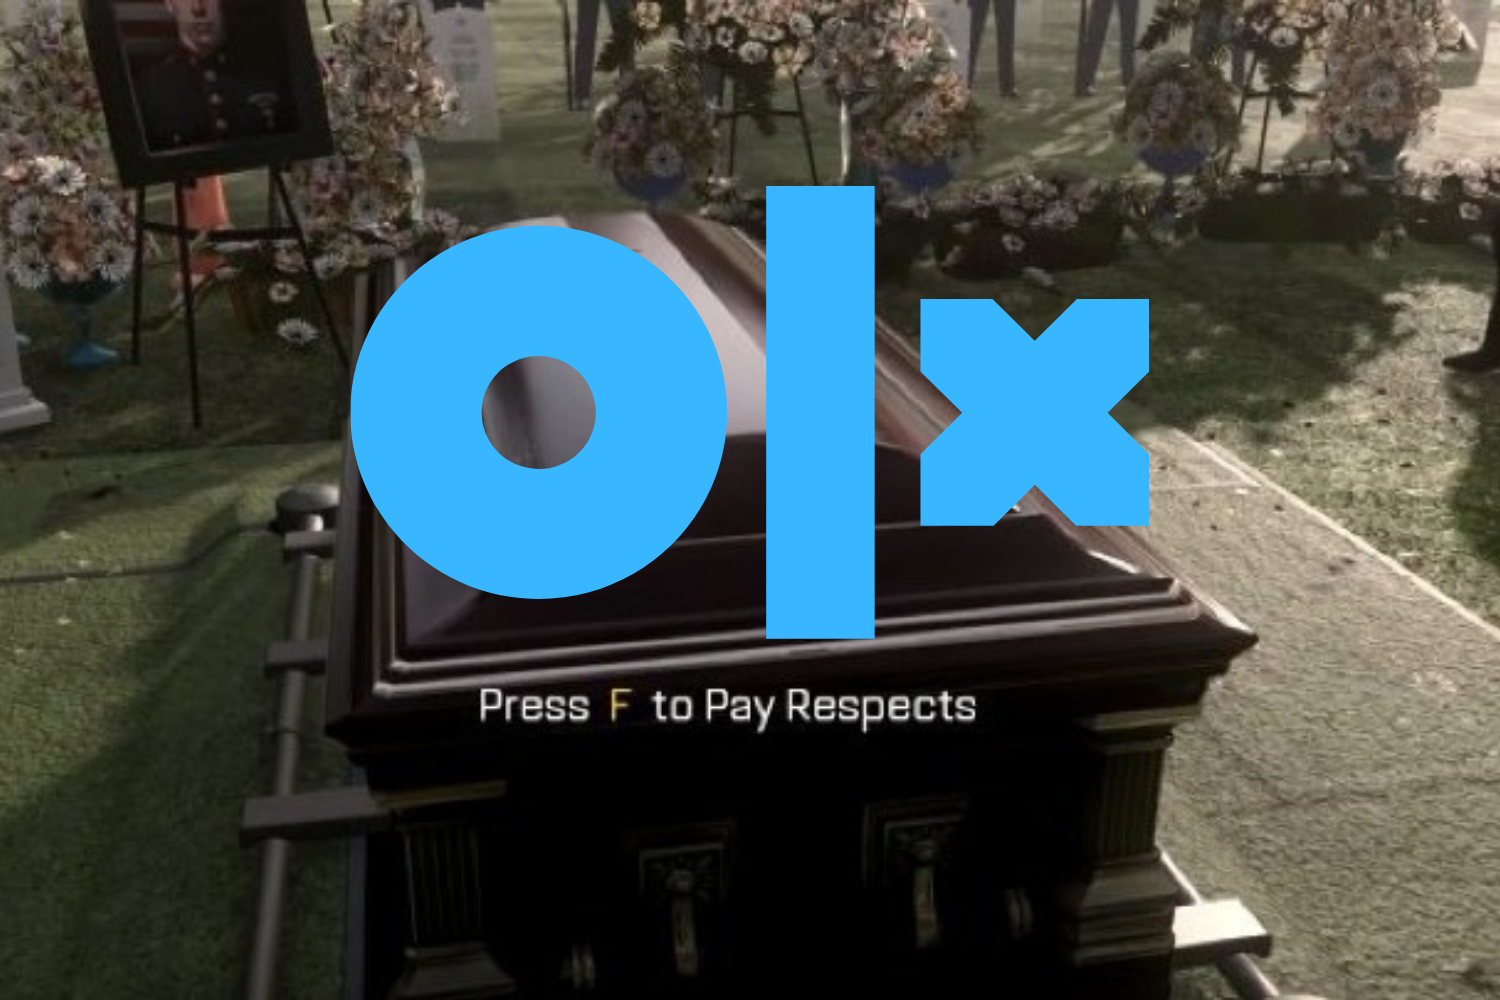 Press F to Pay Respects Template HD, Press F to Pay Respects